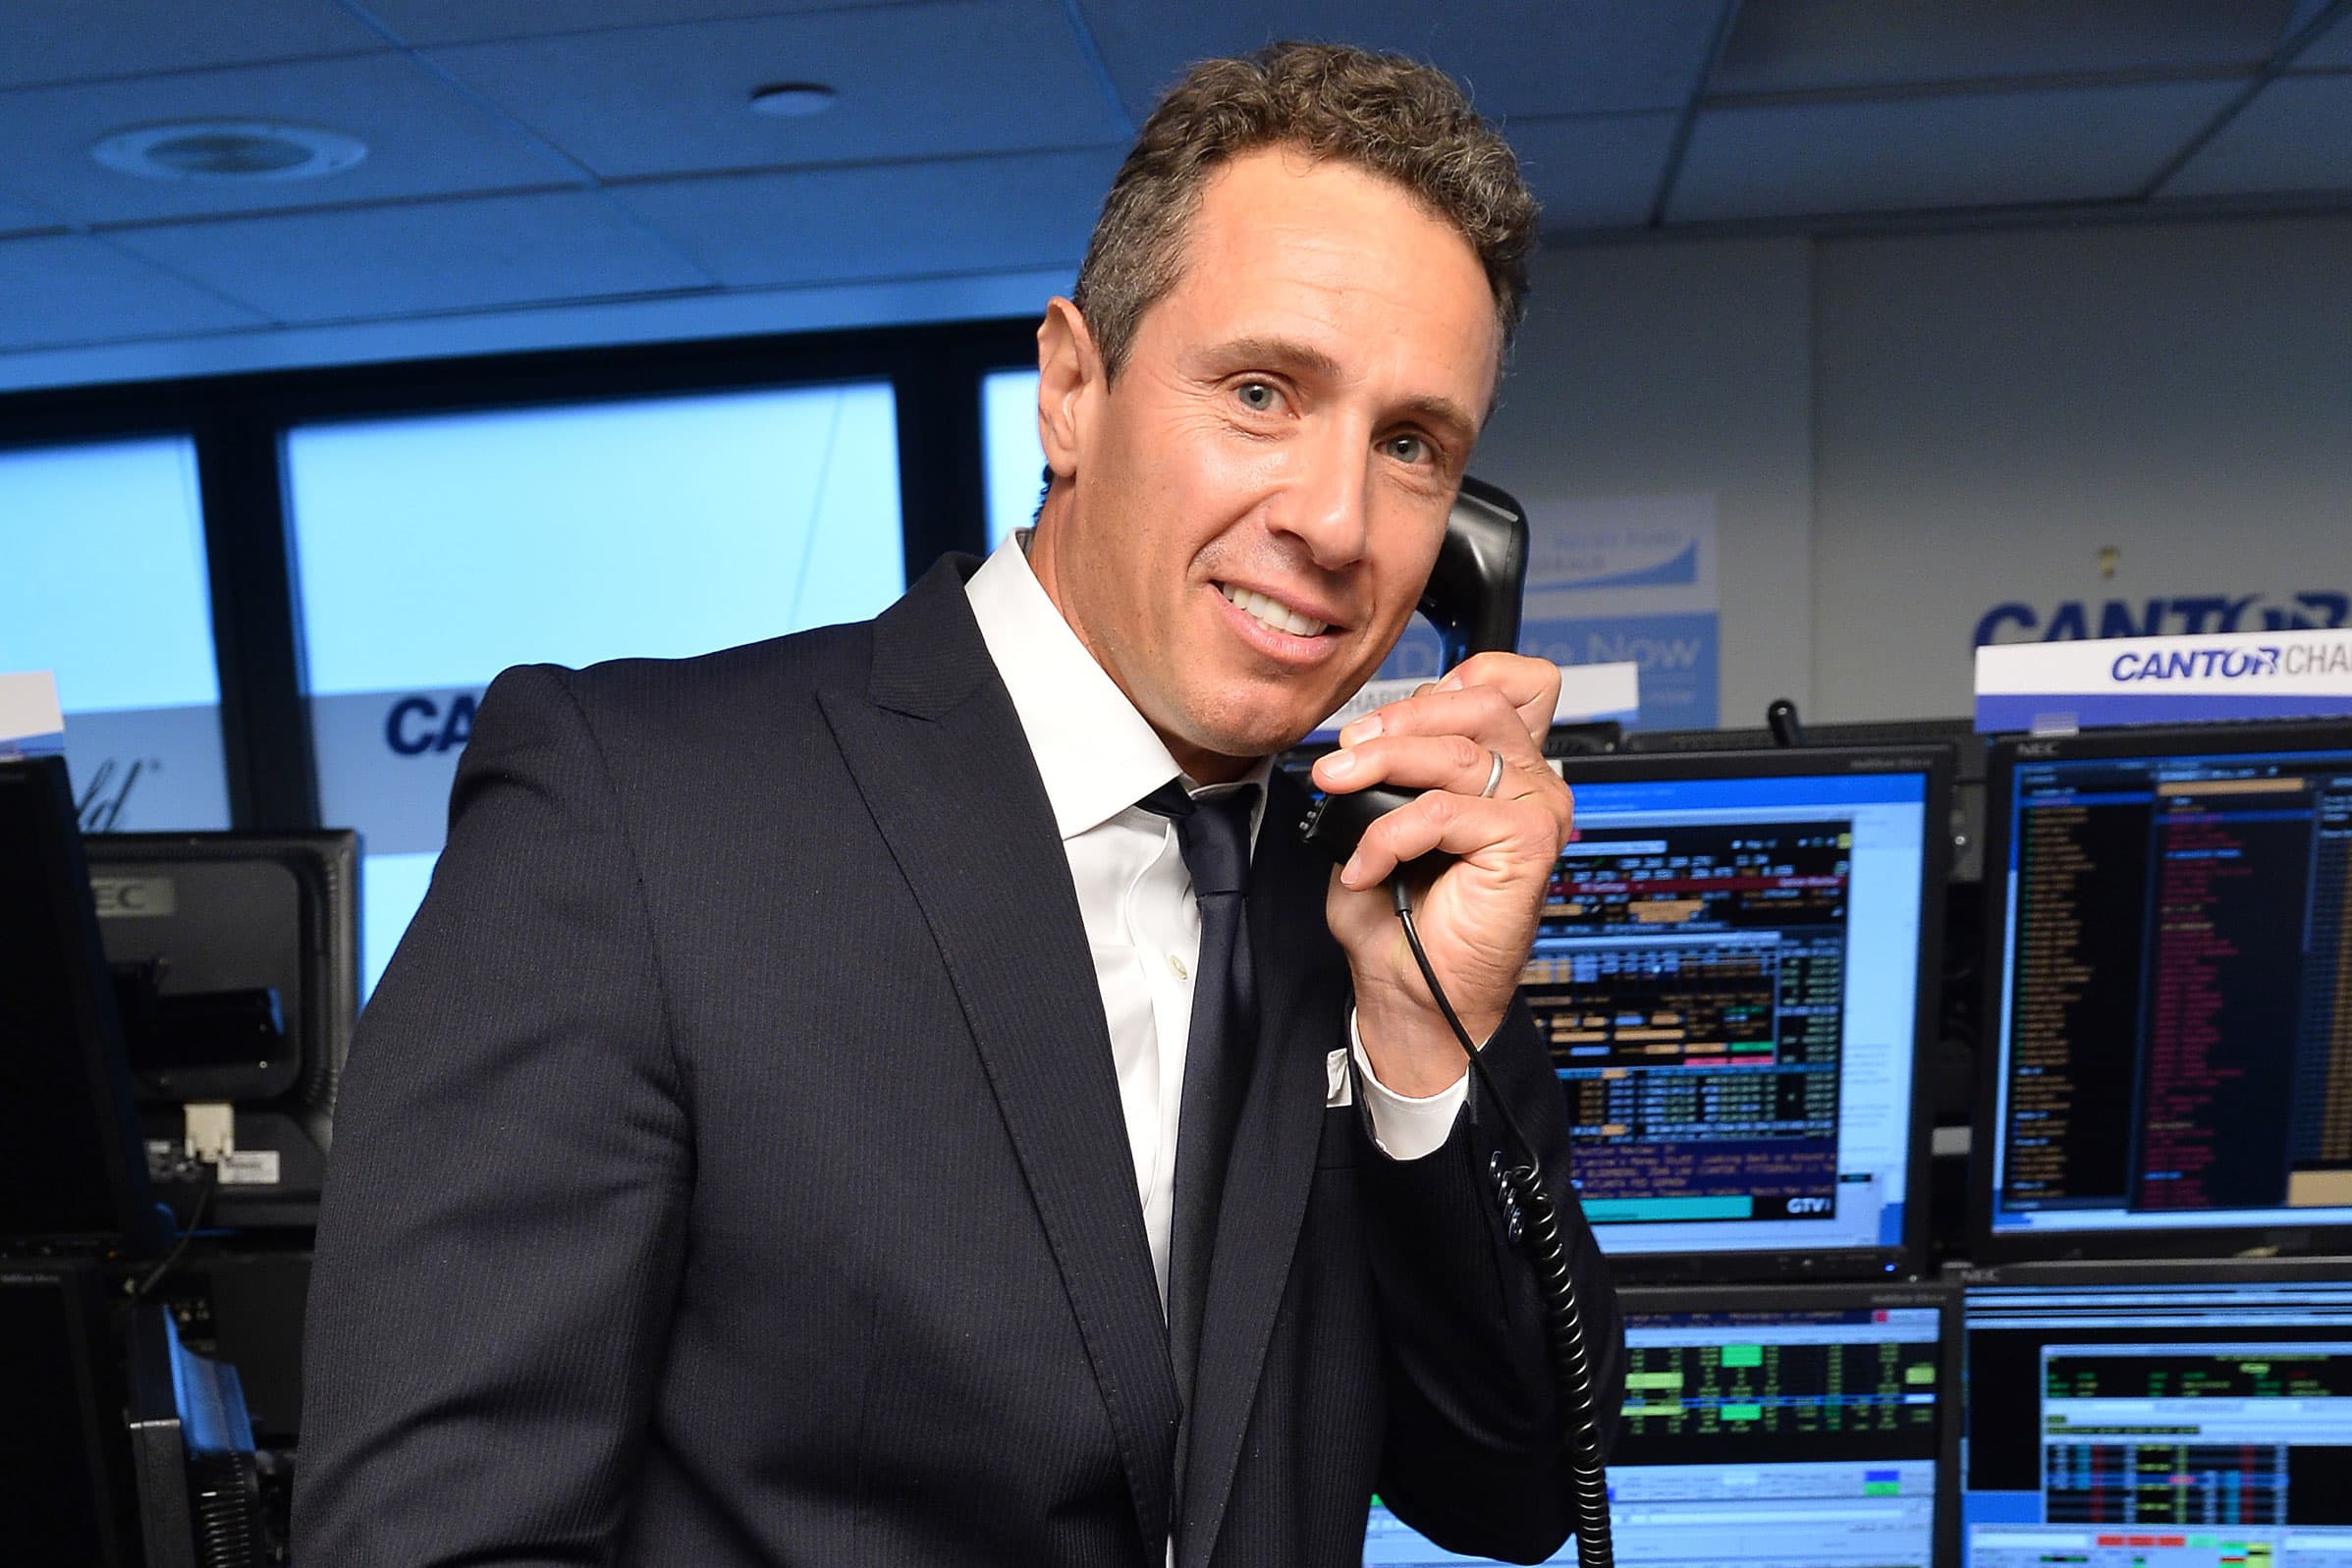 CNN fires Chris Cuomo after new information found during review of how he helped brother Andrew Cuomo